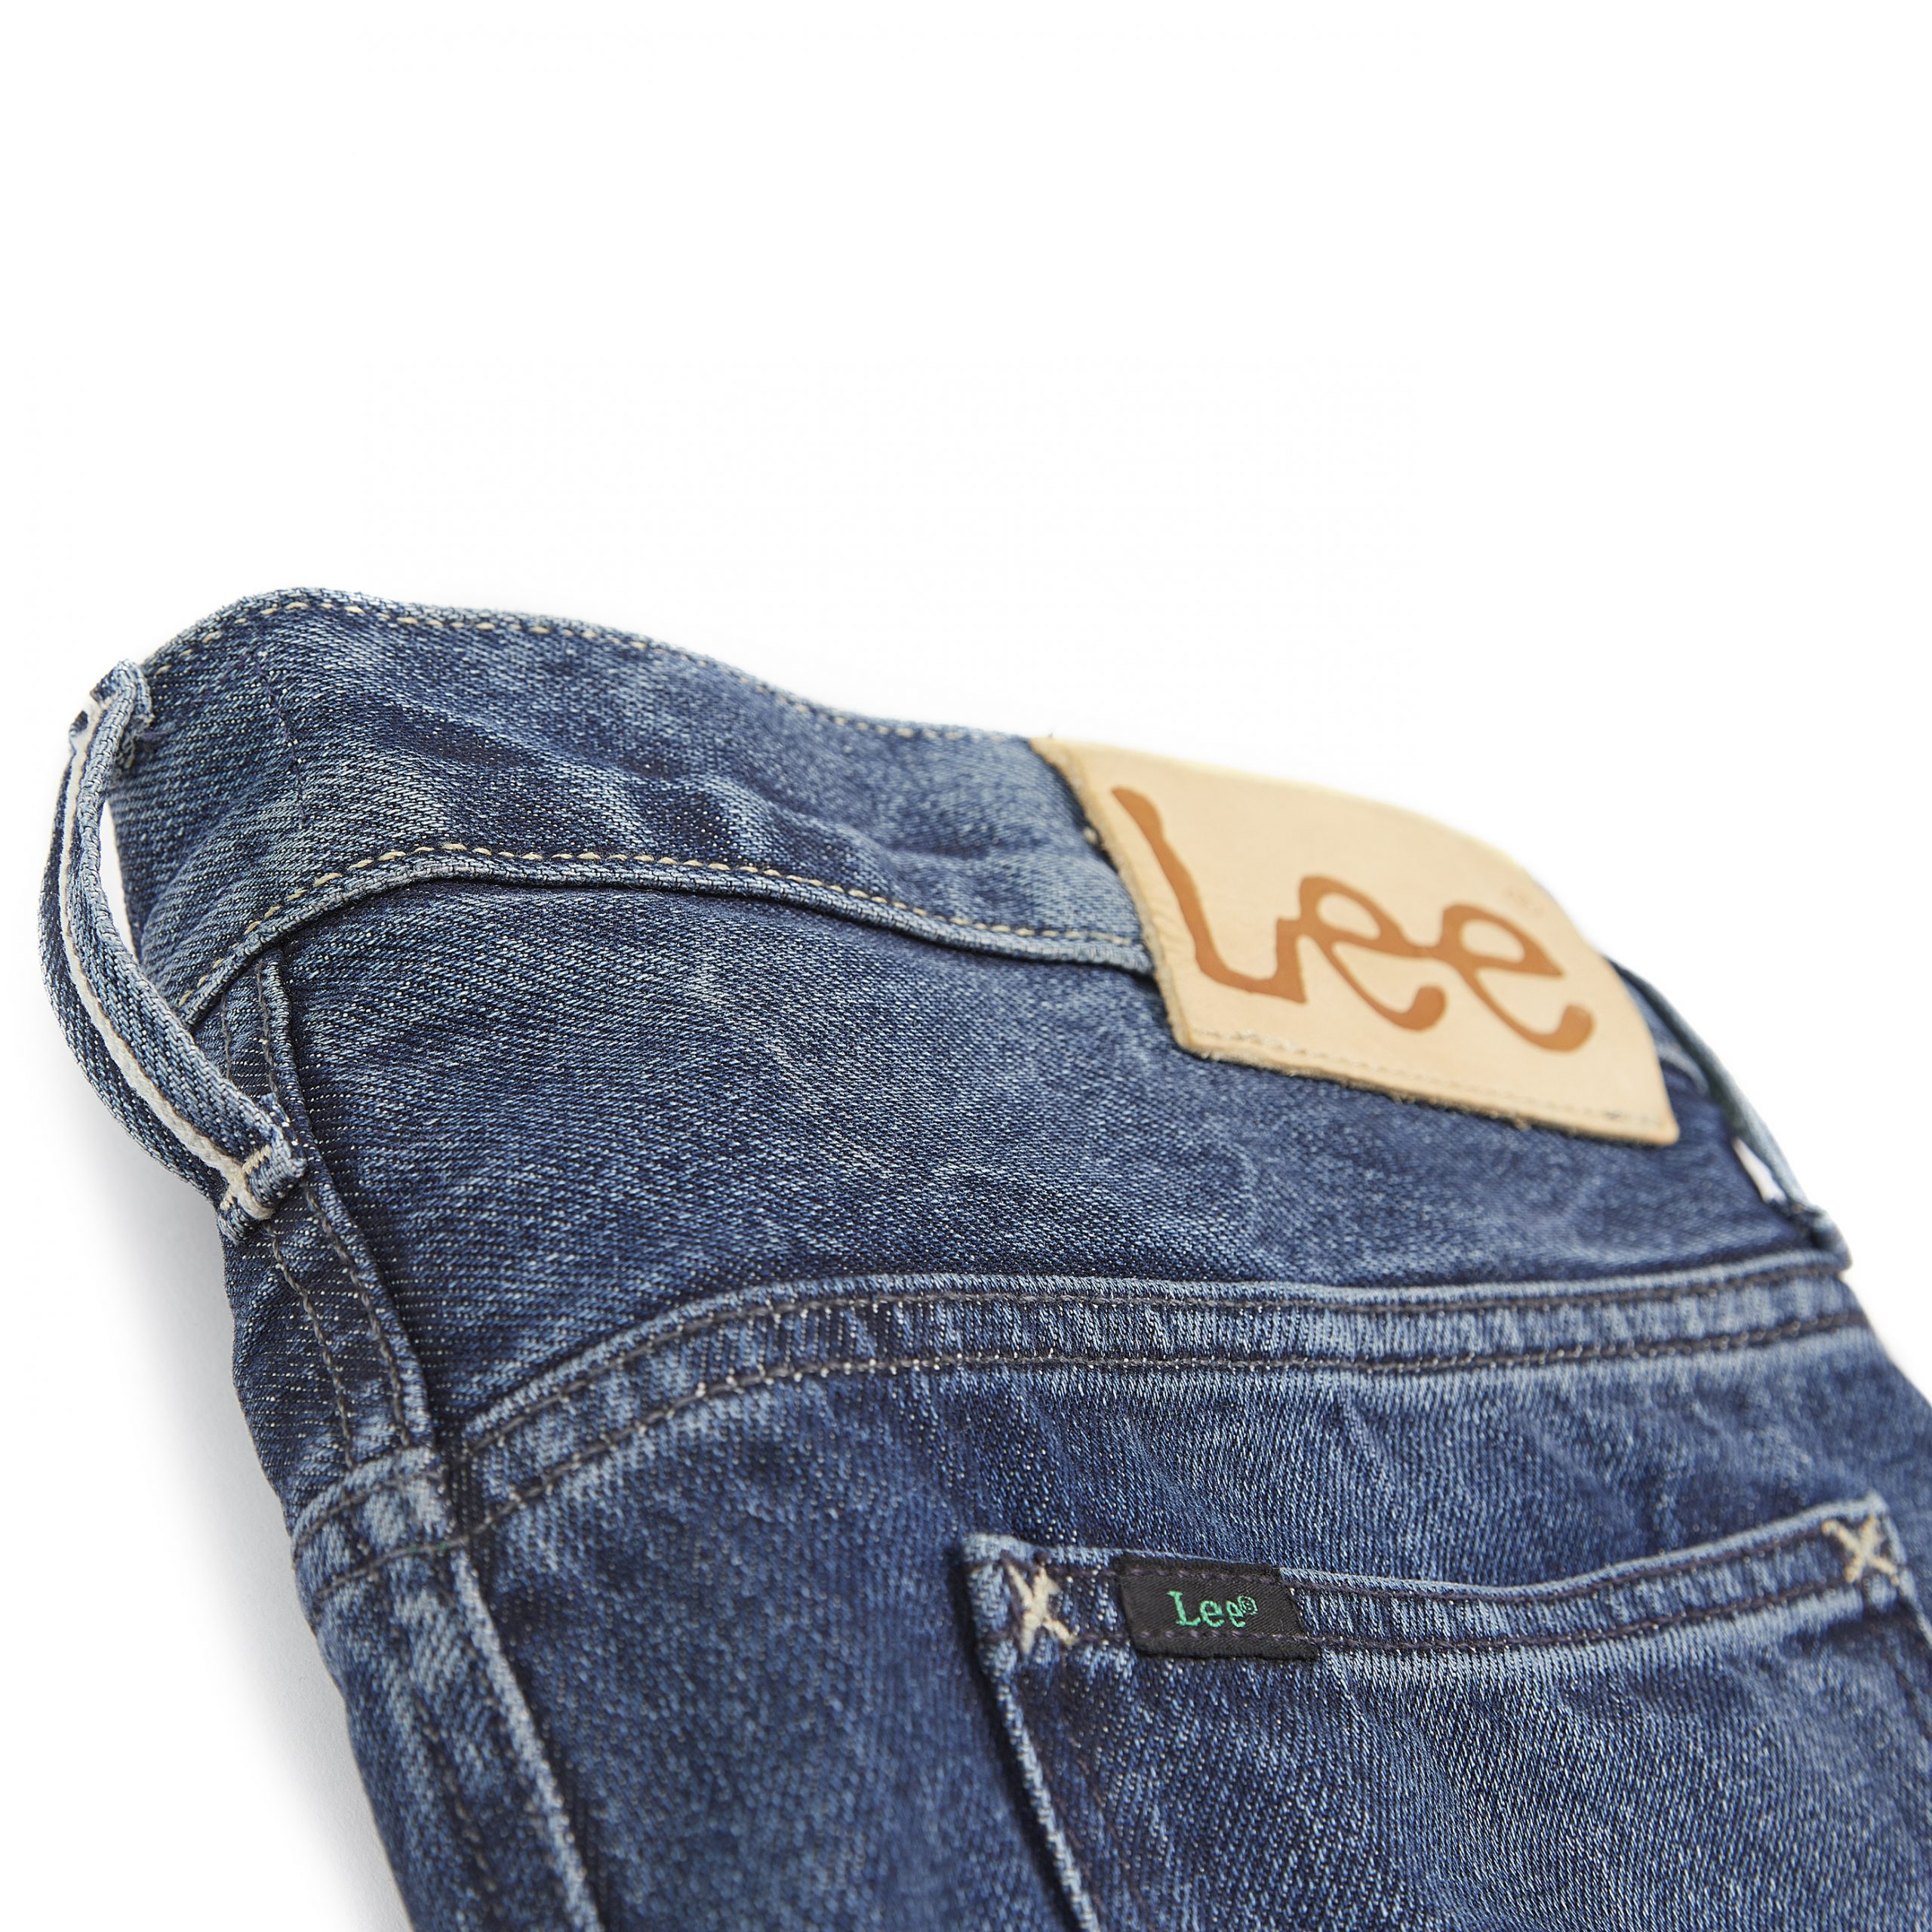 Lee Jeans introduces 'For A That Works' Initiative - Denimandjeans | Trends, News and | Worldwide